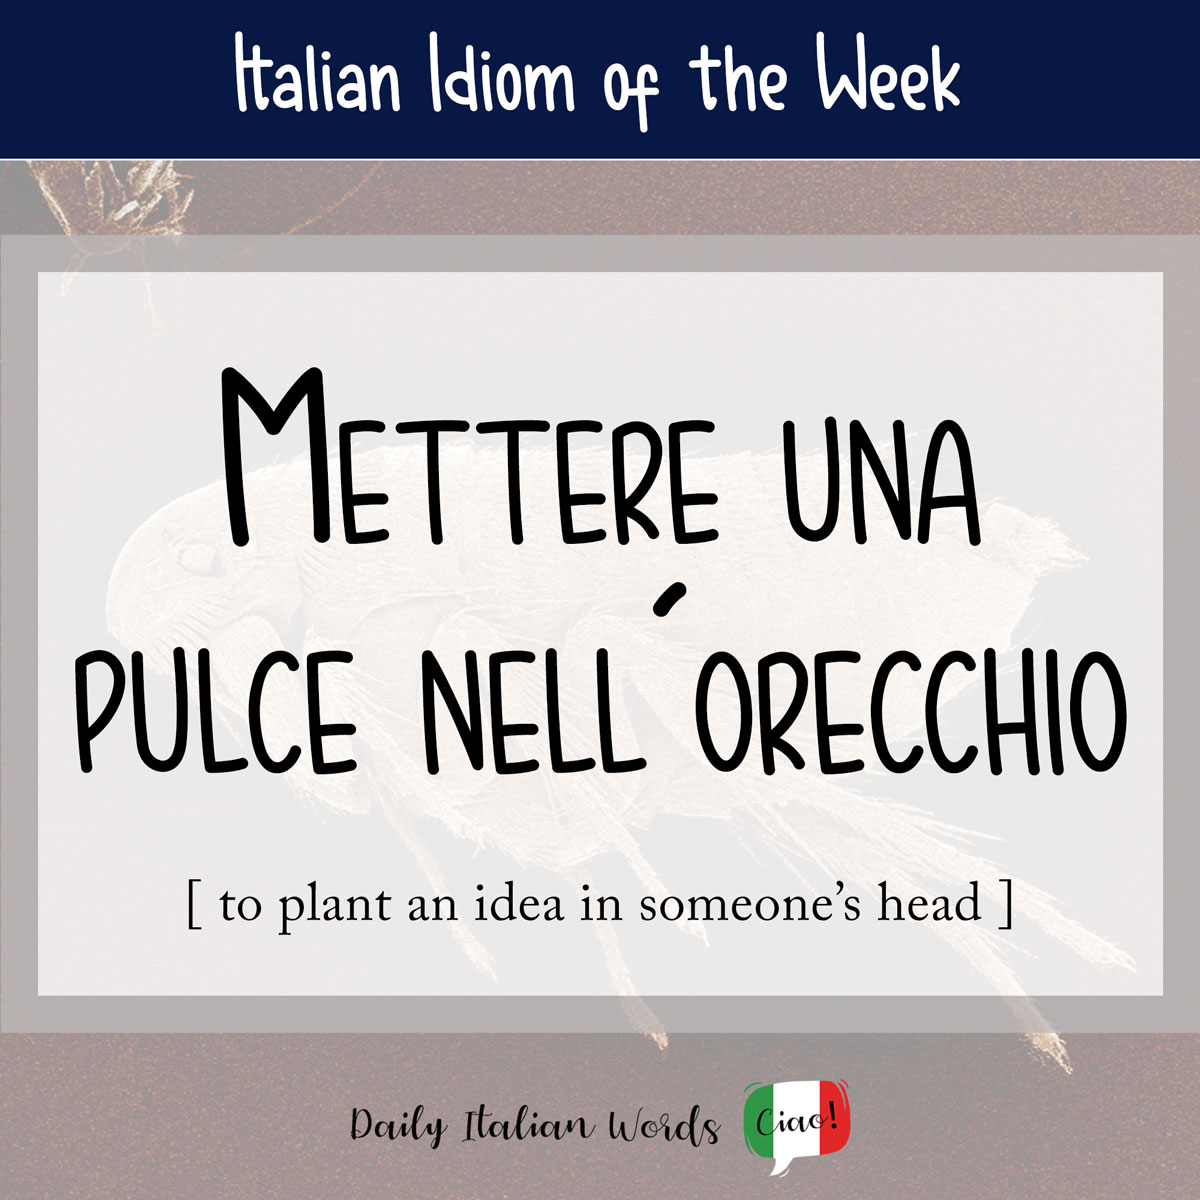 Italian idiom: to put a flea in your ear (to plant an idea in someone's mind)